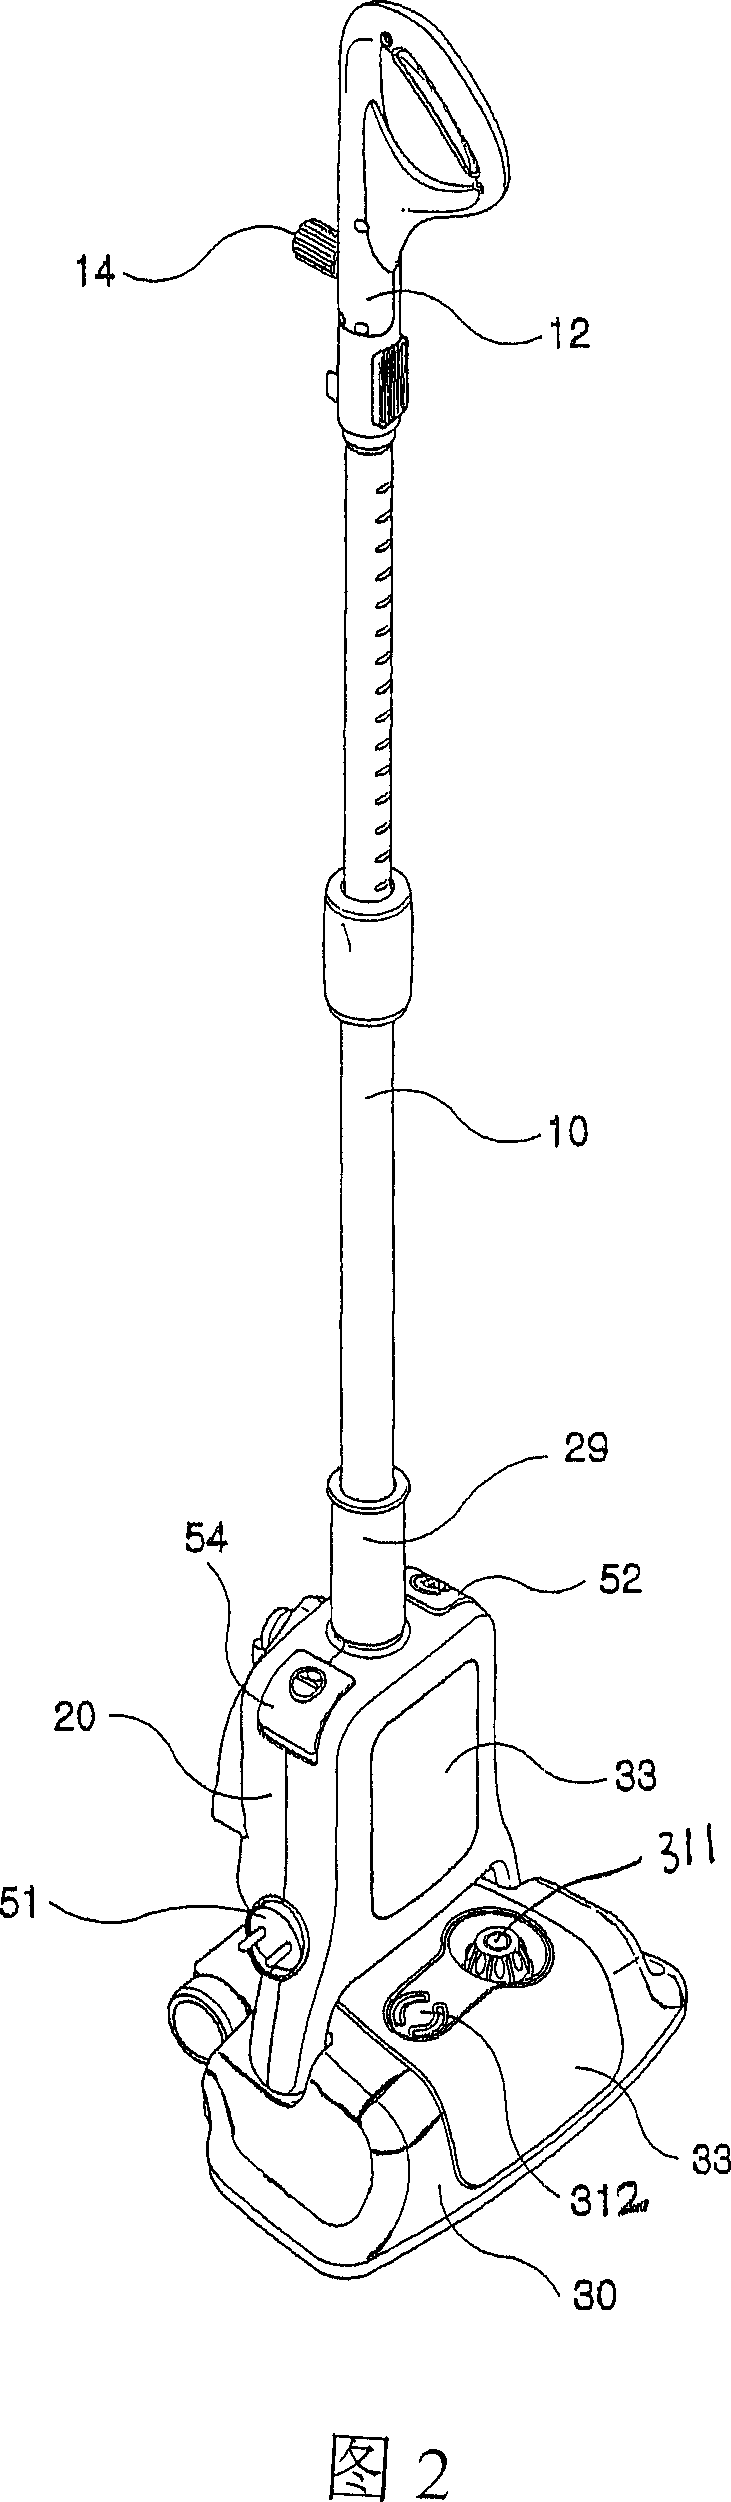 Steam sweeper possessing spiral device